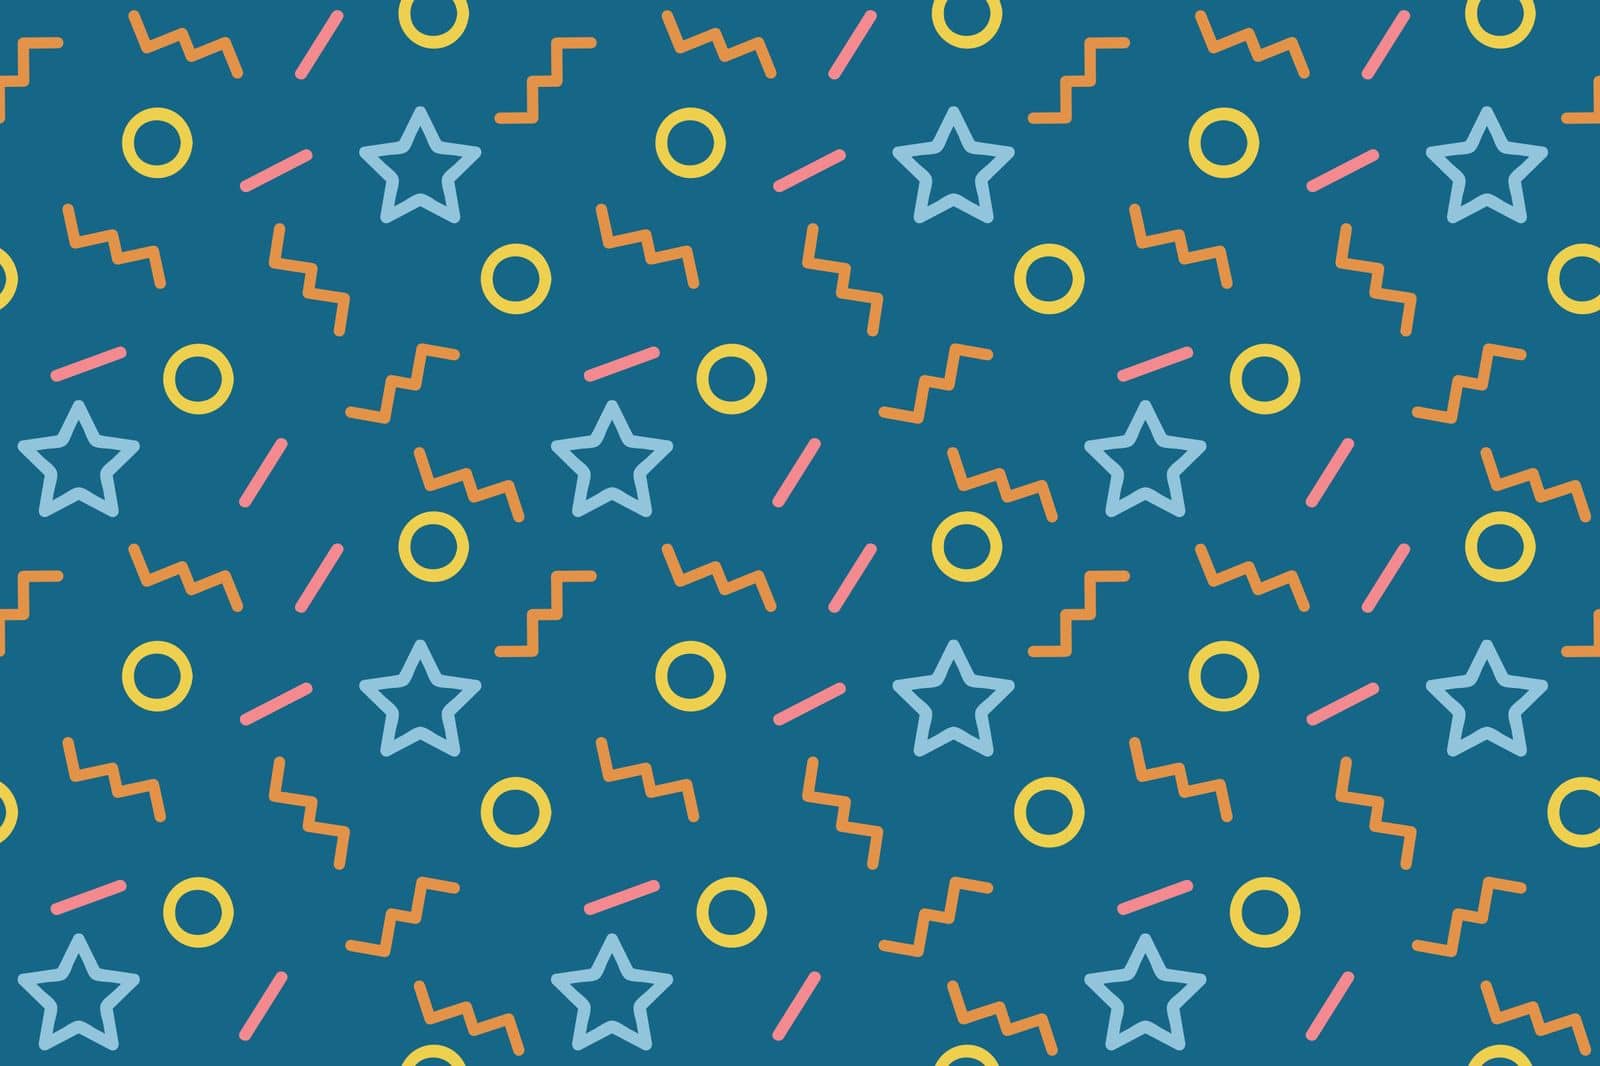 Abstract modern seamless pattern. Memphis style background with various shapes zigzag, star, circle. Kids fabric, textile, wallpaper, wrapping design. Vector illustration